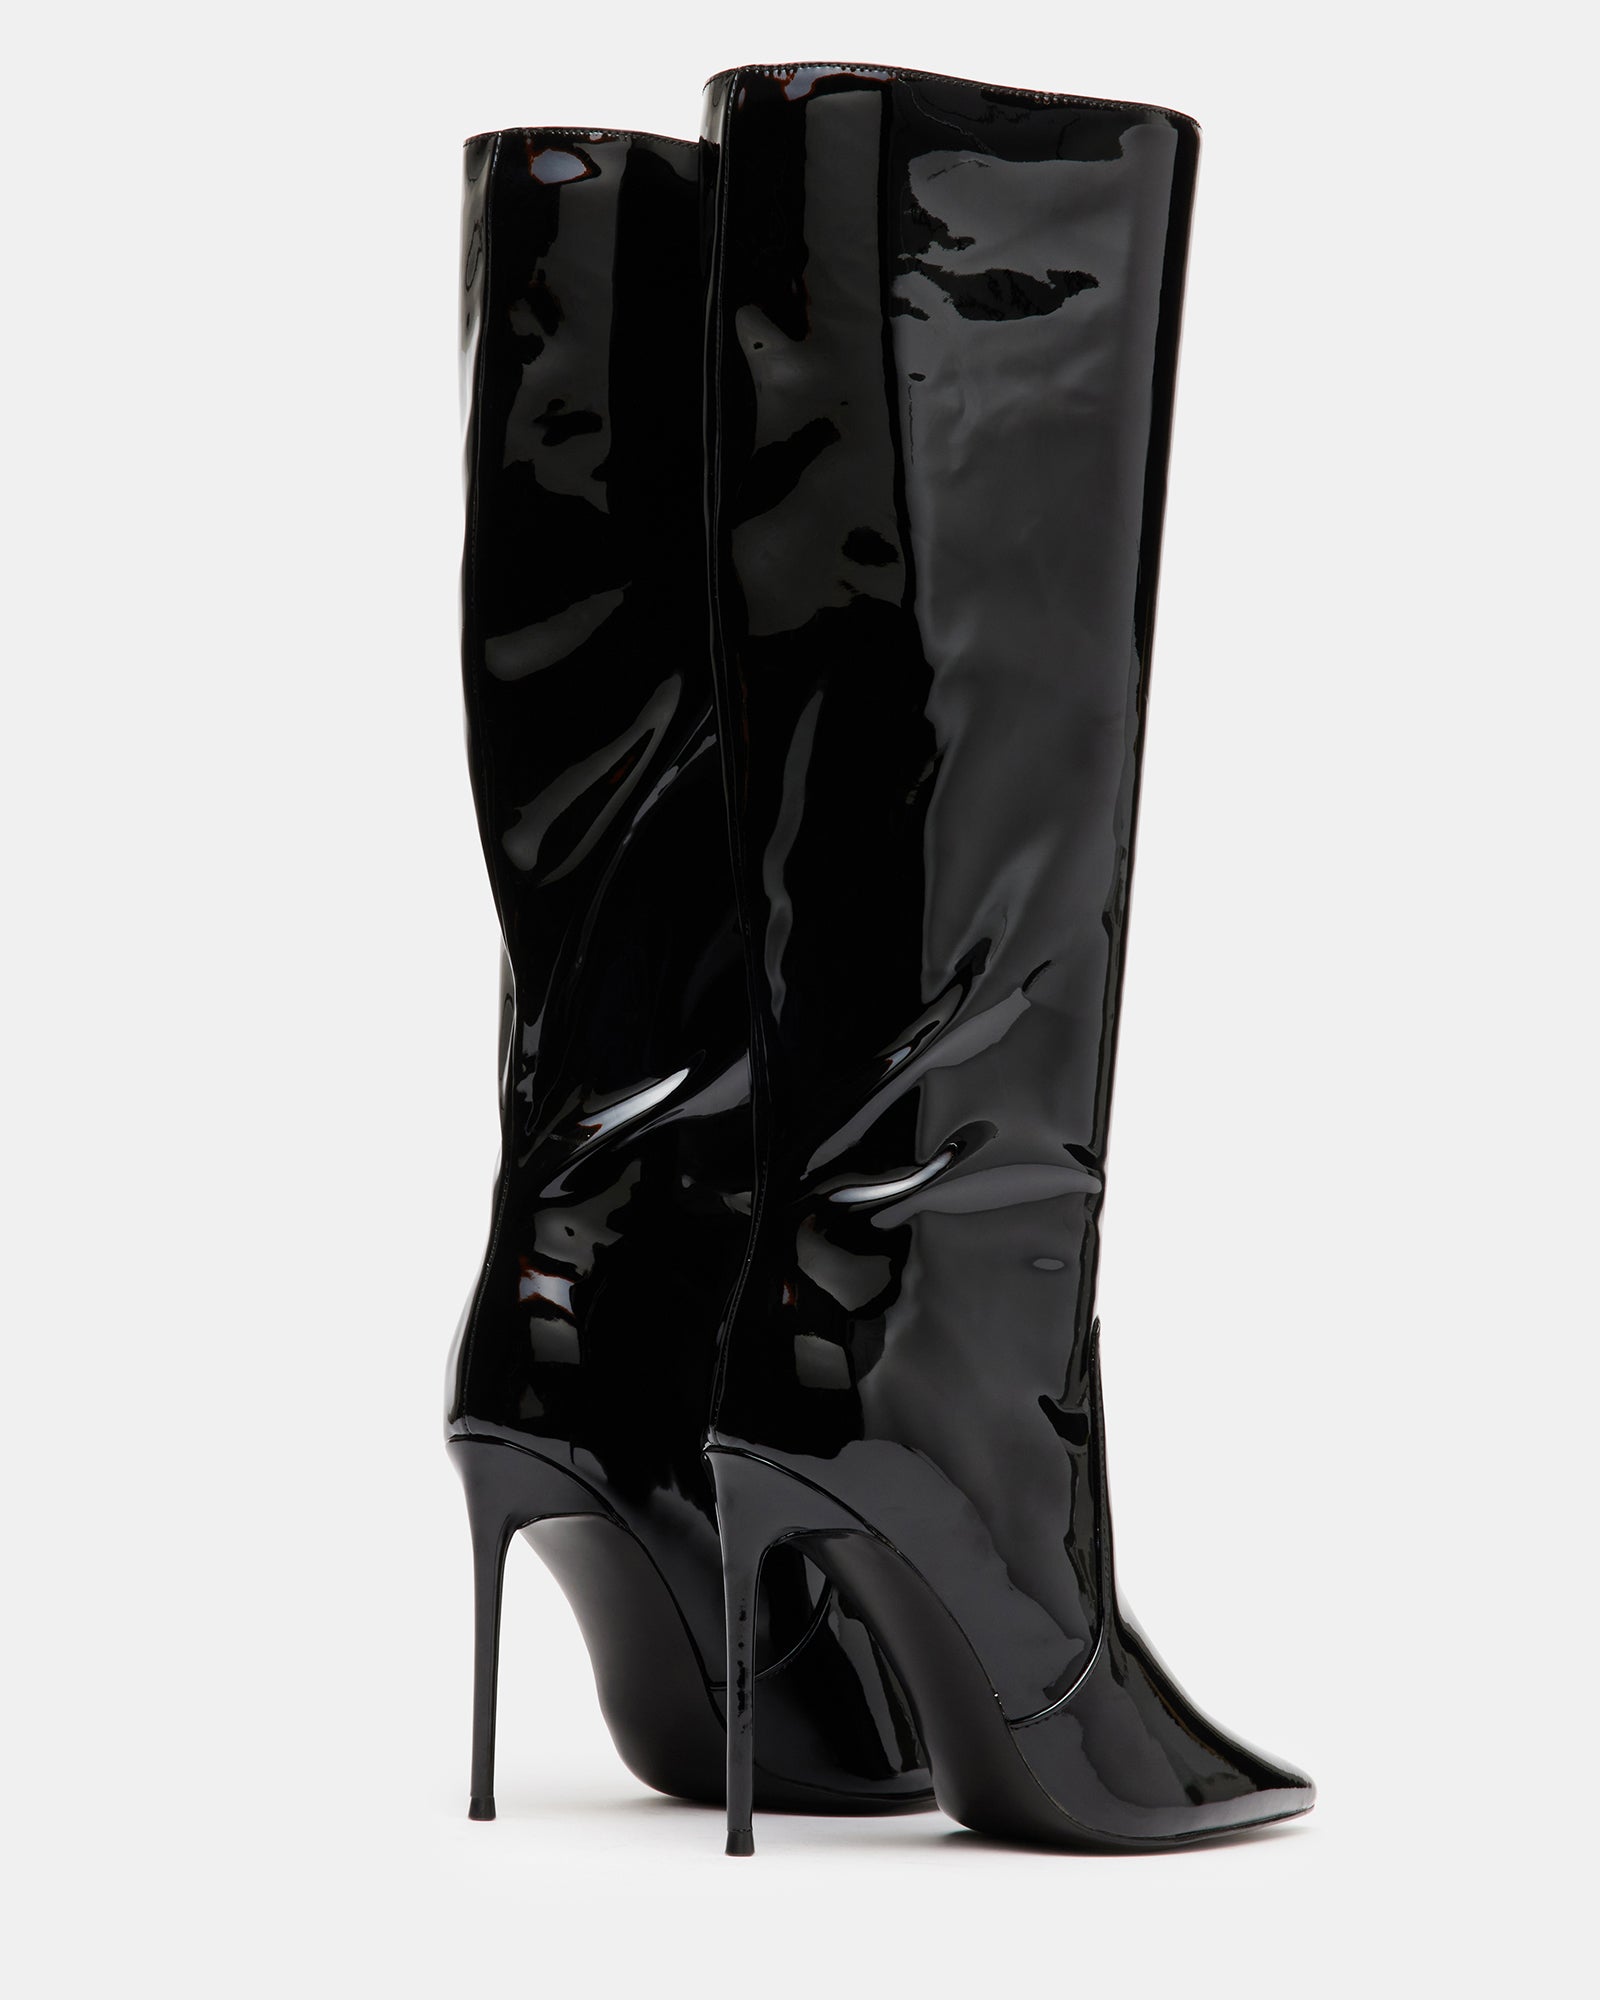 PANTHER Black Patent Knee High Pointed Toe Boot | Women's Boots – Steve ...